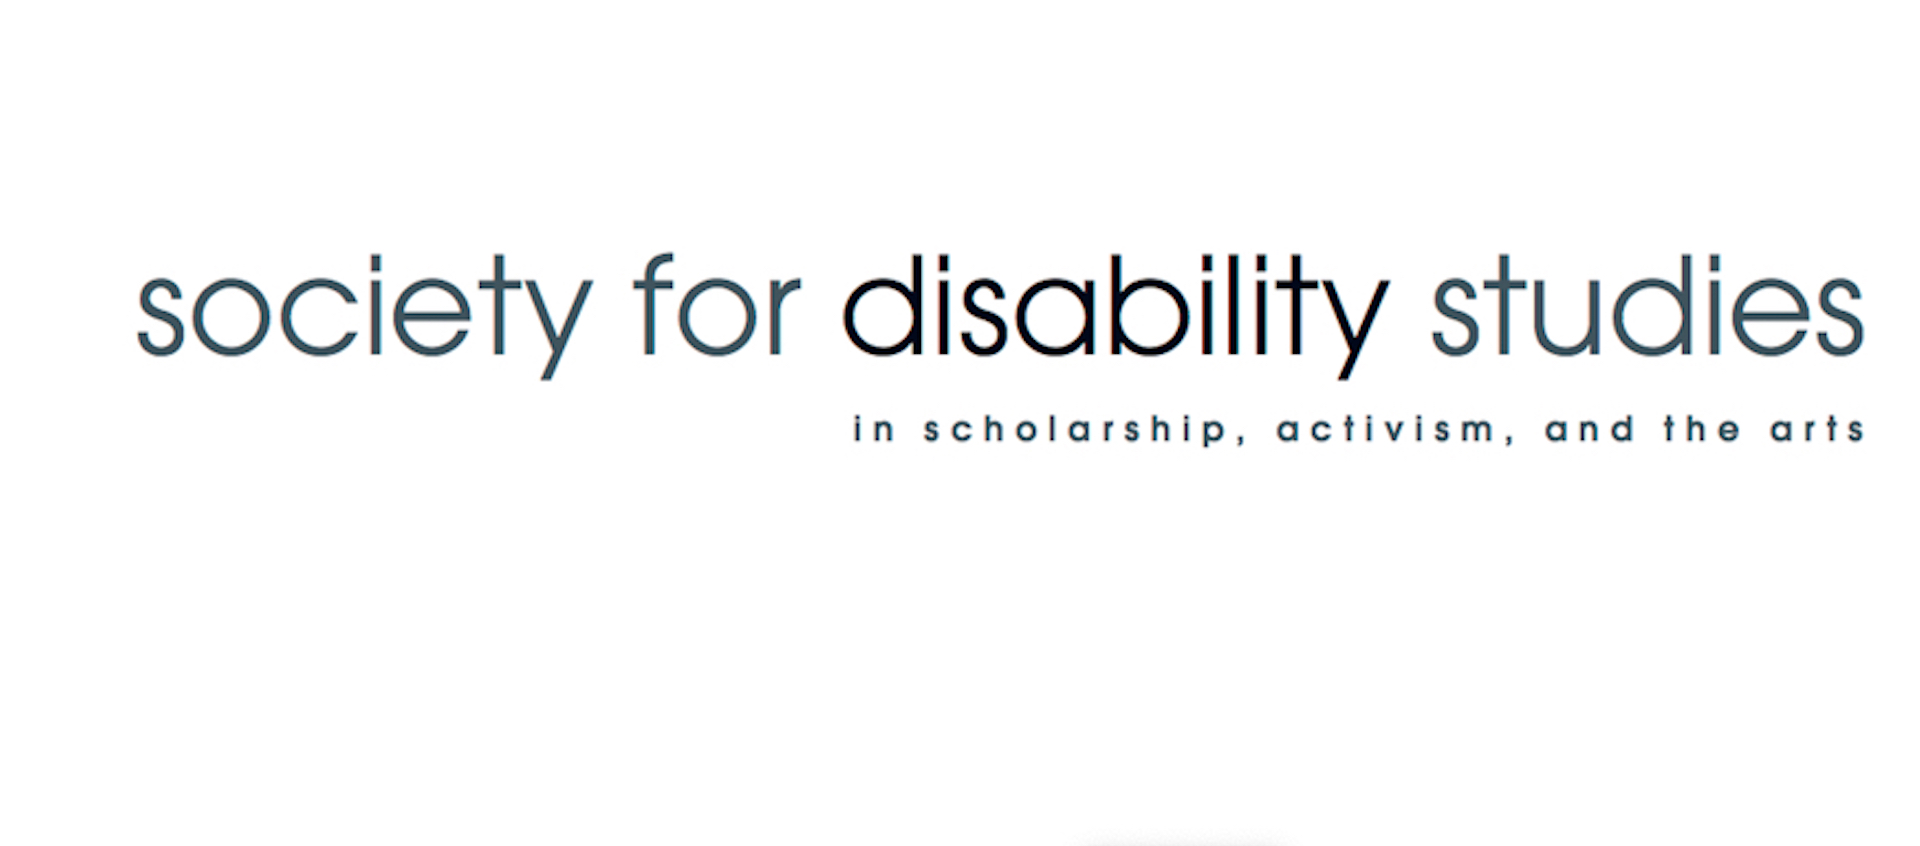 gray and black text logo on white background for the Society of Disability Studies